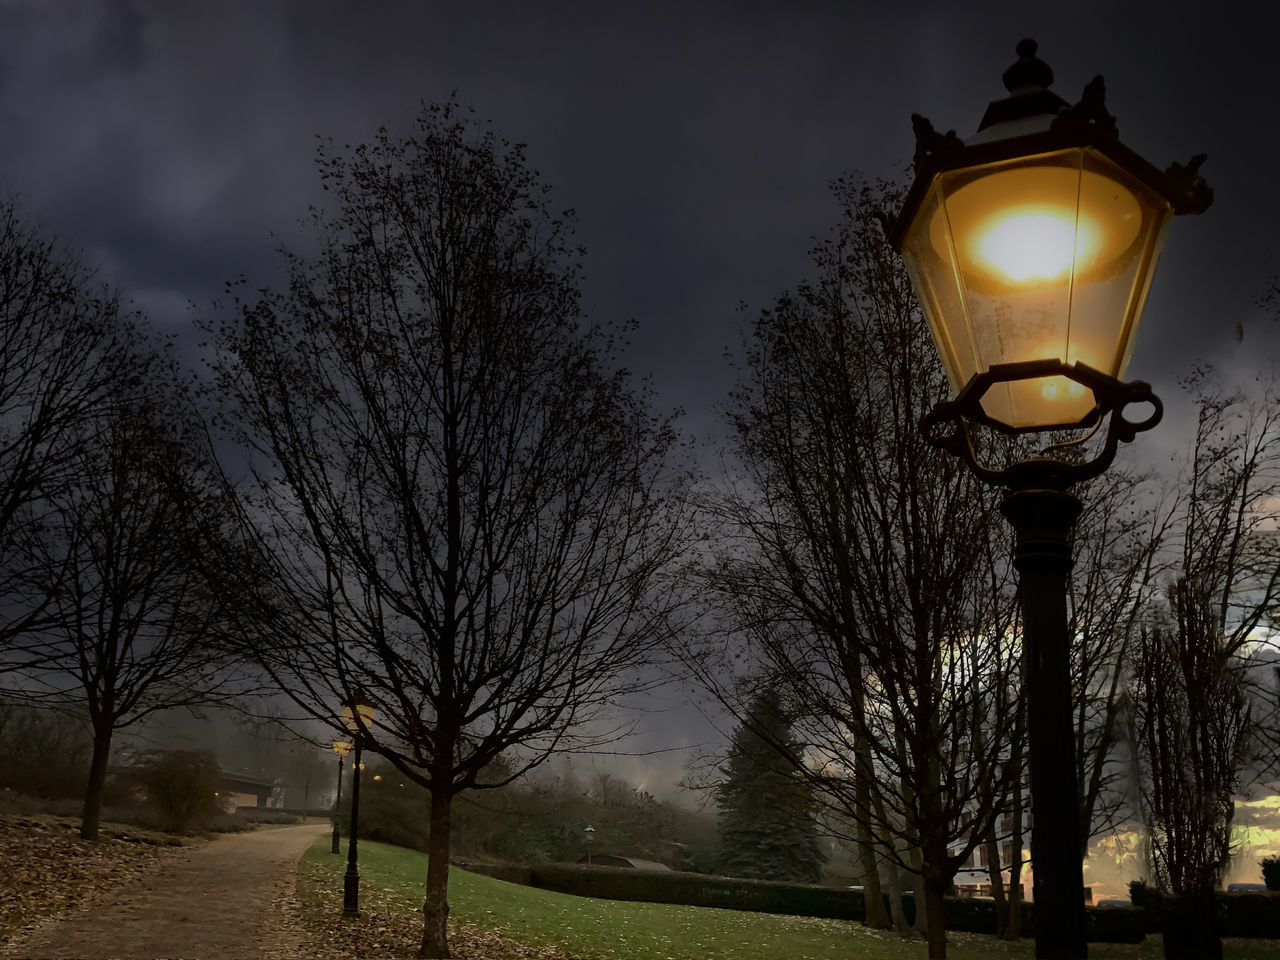 LOW ANGLE VIEW OF ILLUMINATED STREET LIGHT AT DUSK